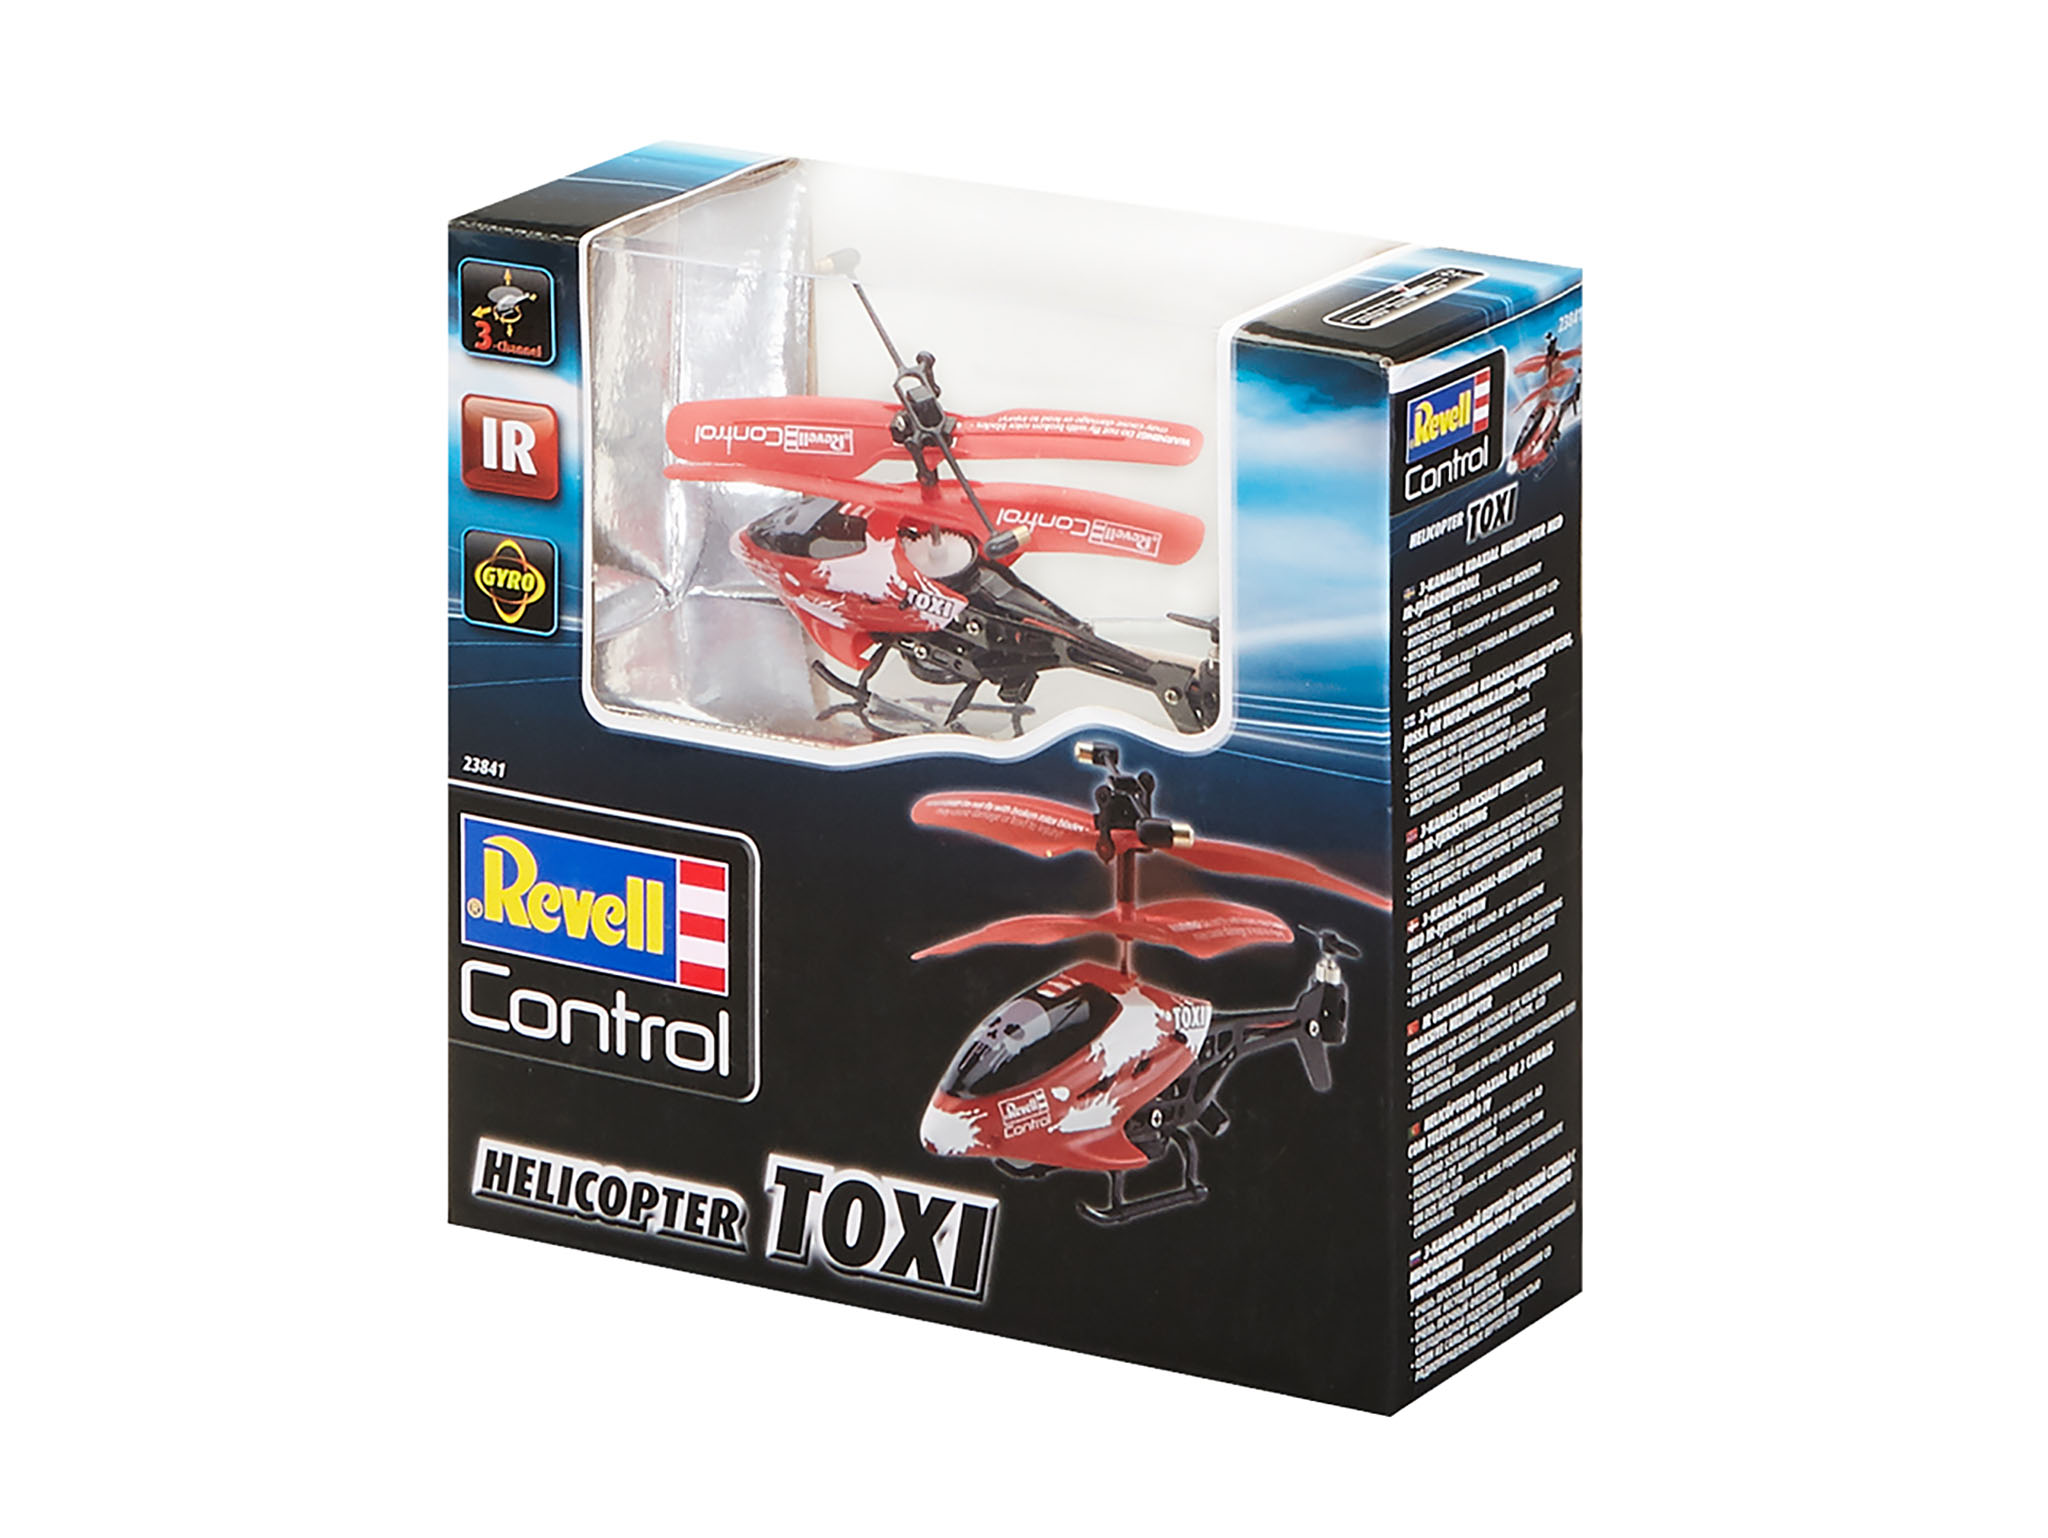 Helicopter, REVELL Rot Toxi Mehrfarbig